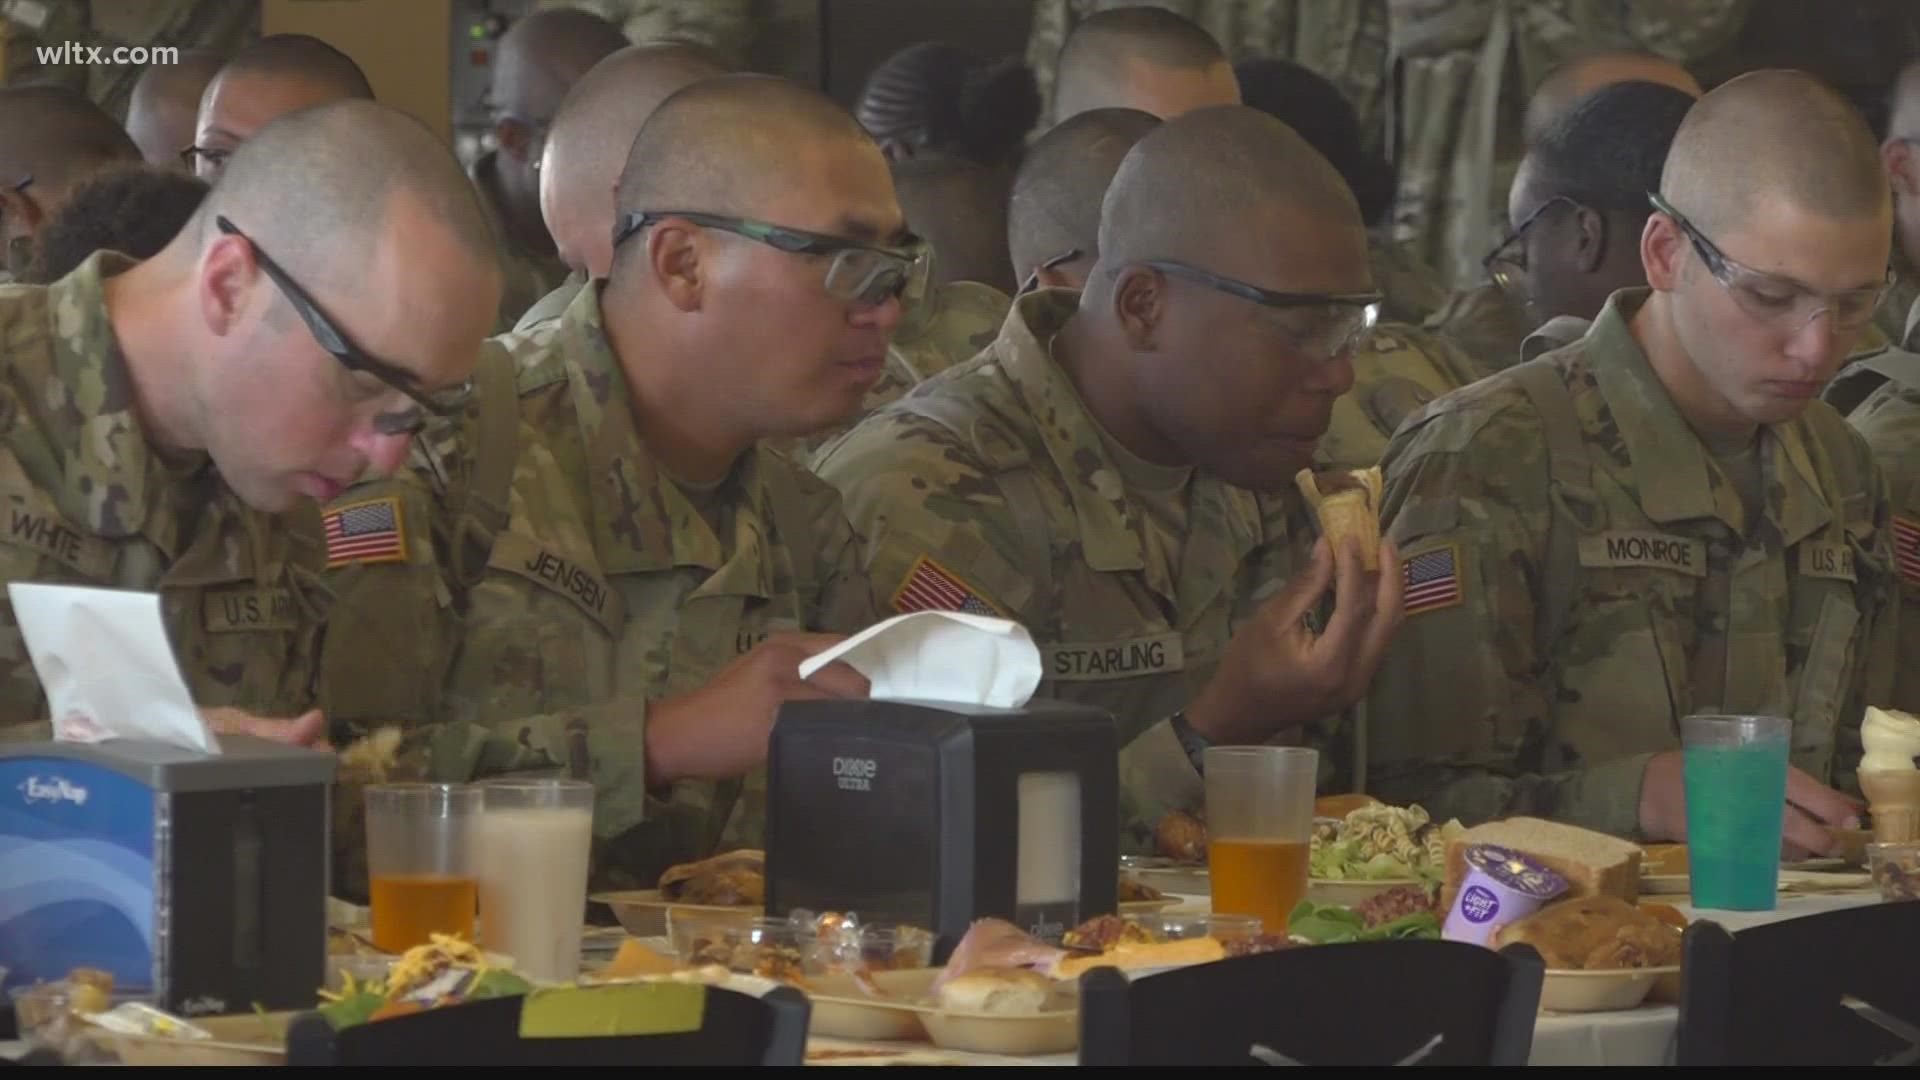 Hundreds of pounds of turkey, ham, prime rib, and shrimp for nearly 10,000 soldiers.